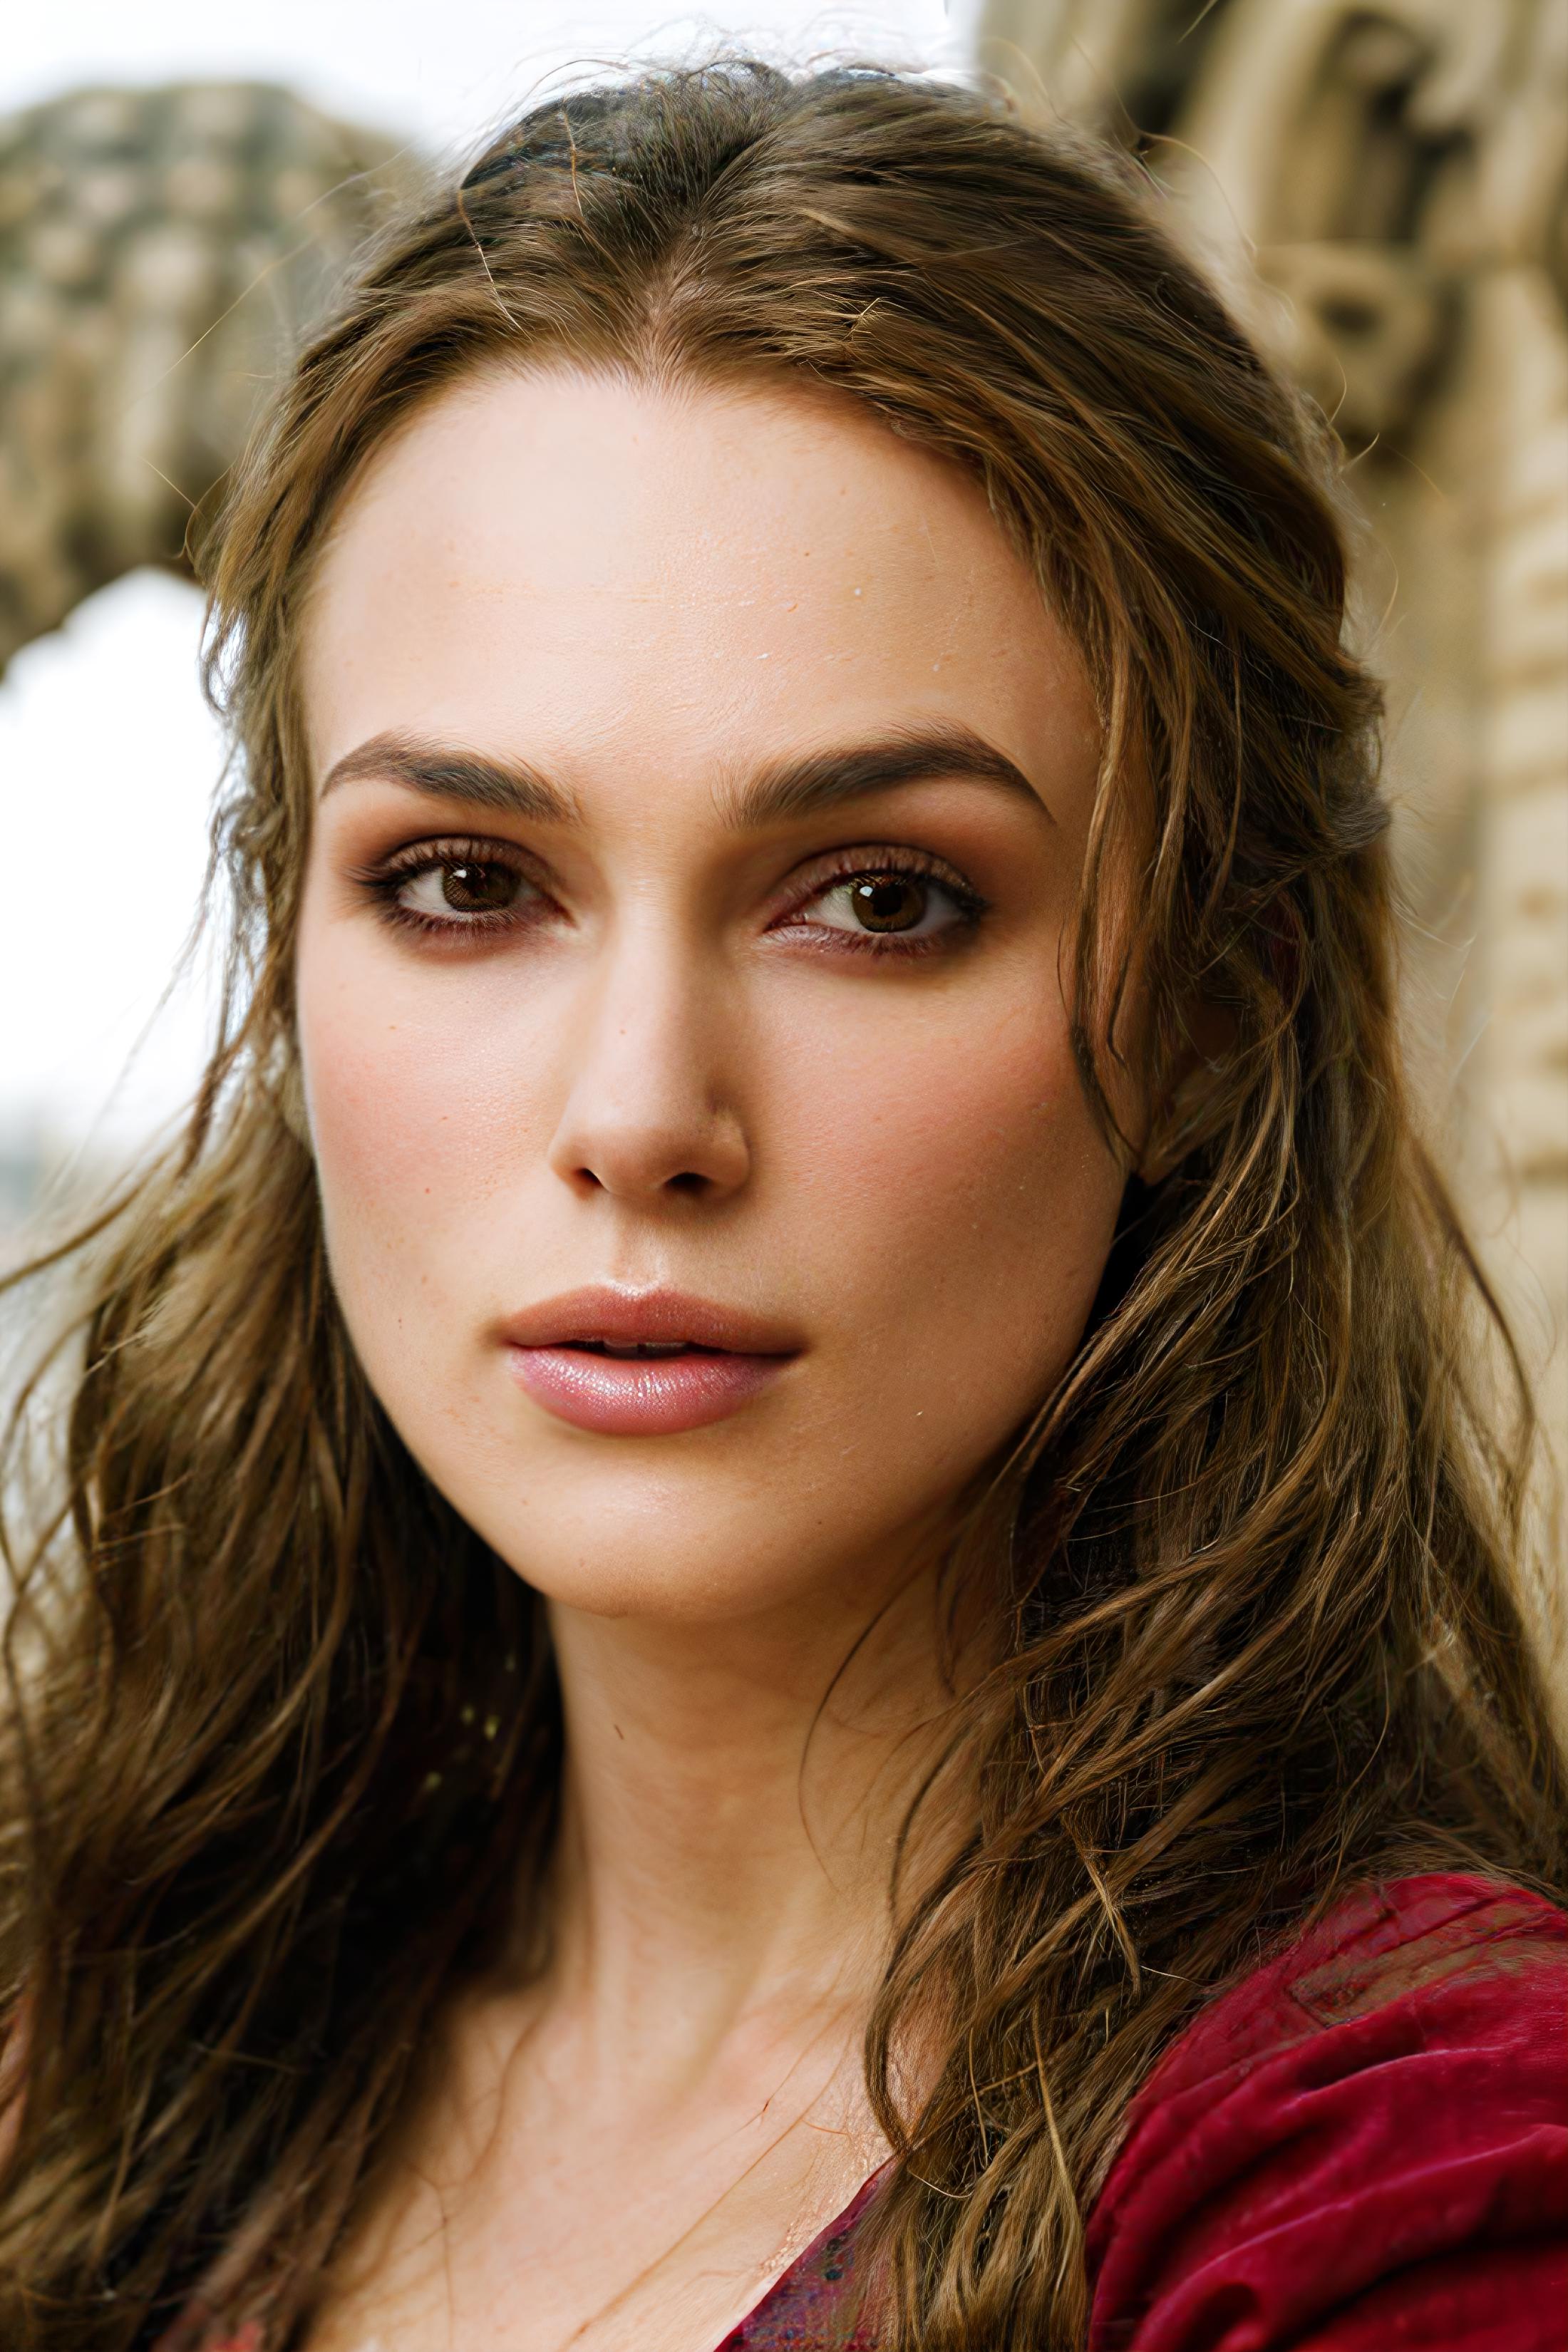 Keira Knightley image by __2_